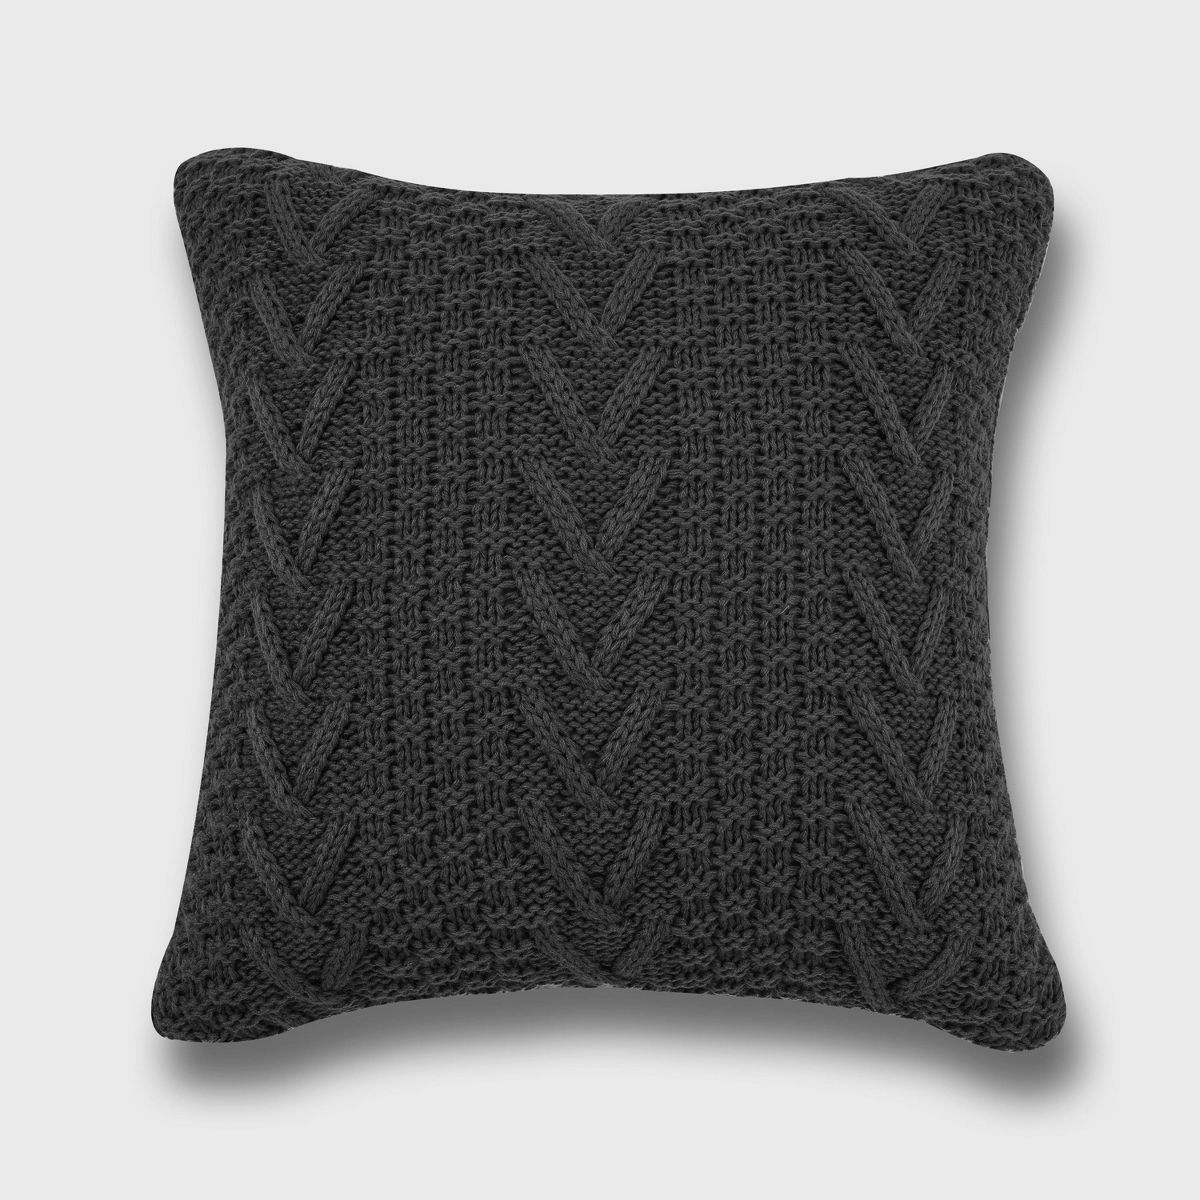 20"x20" Oversize Chunky Sweater Knit Square Throw Pillow Black - Evergrace | Target